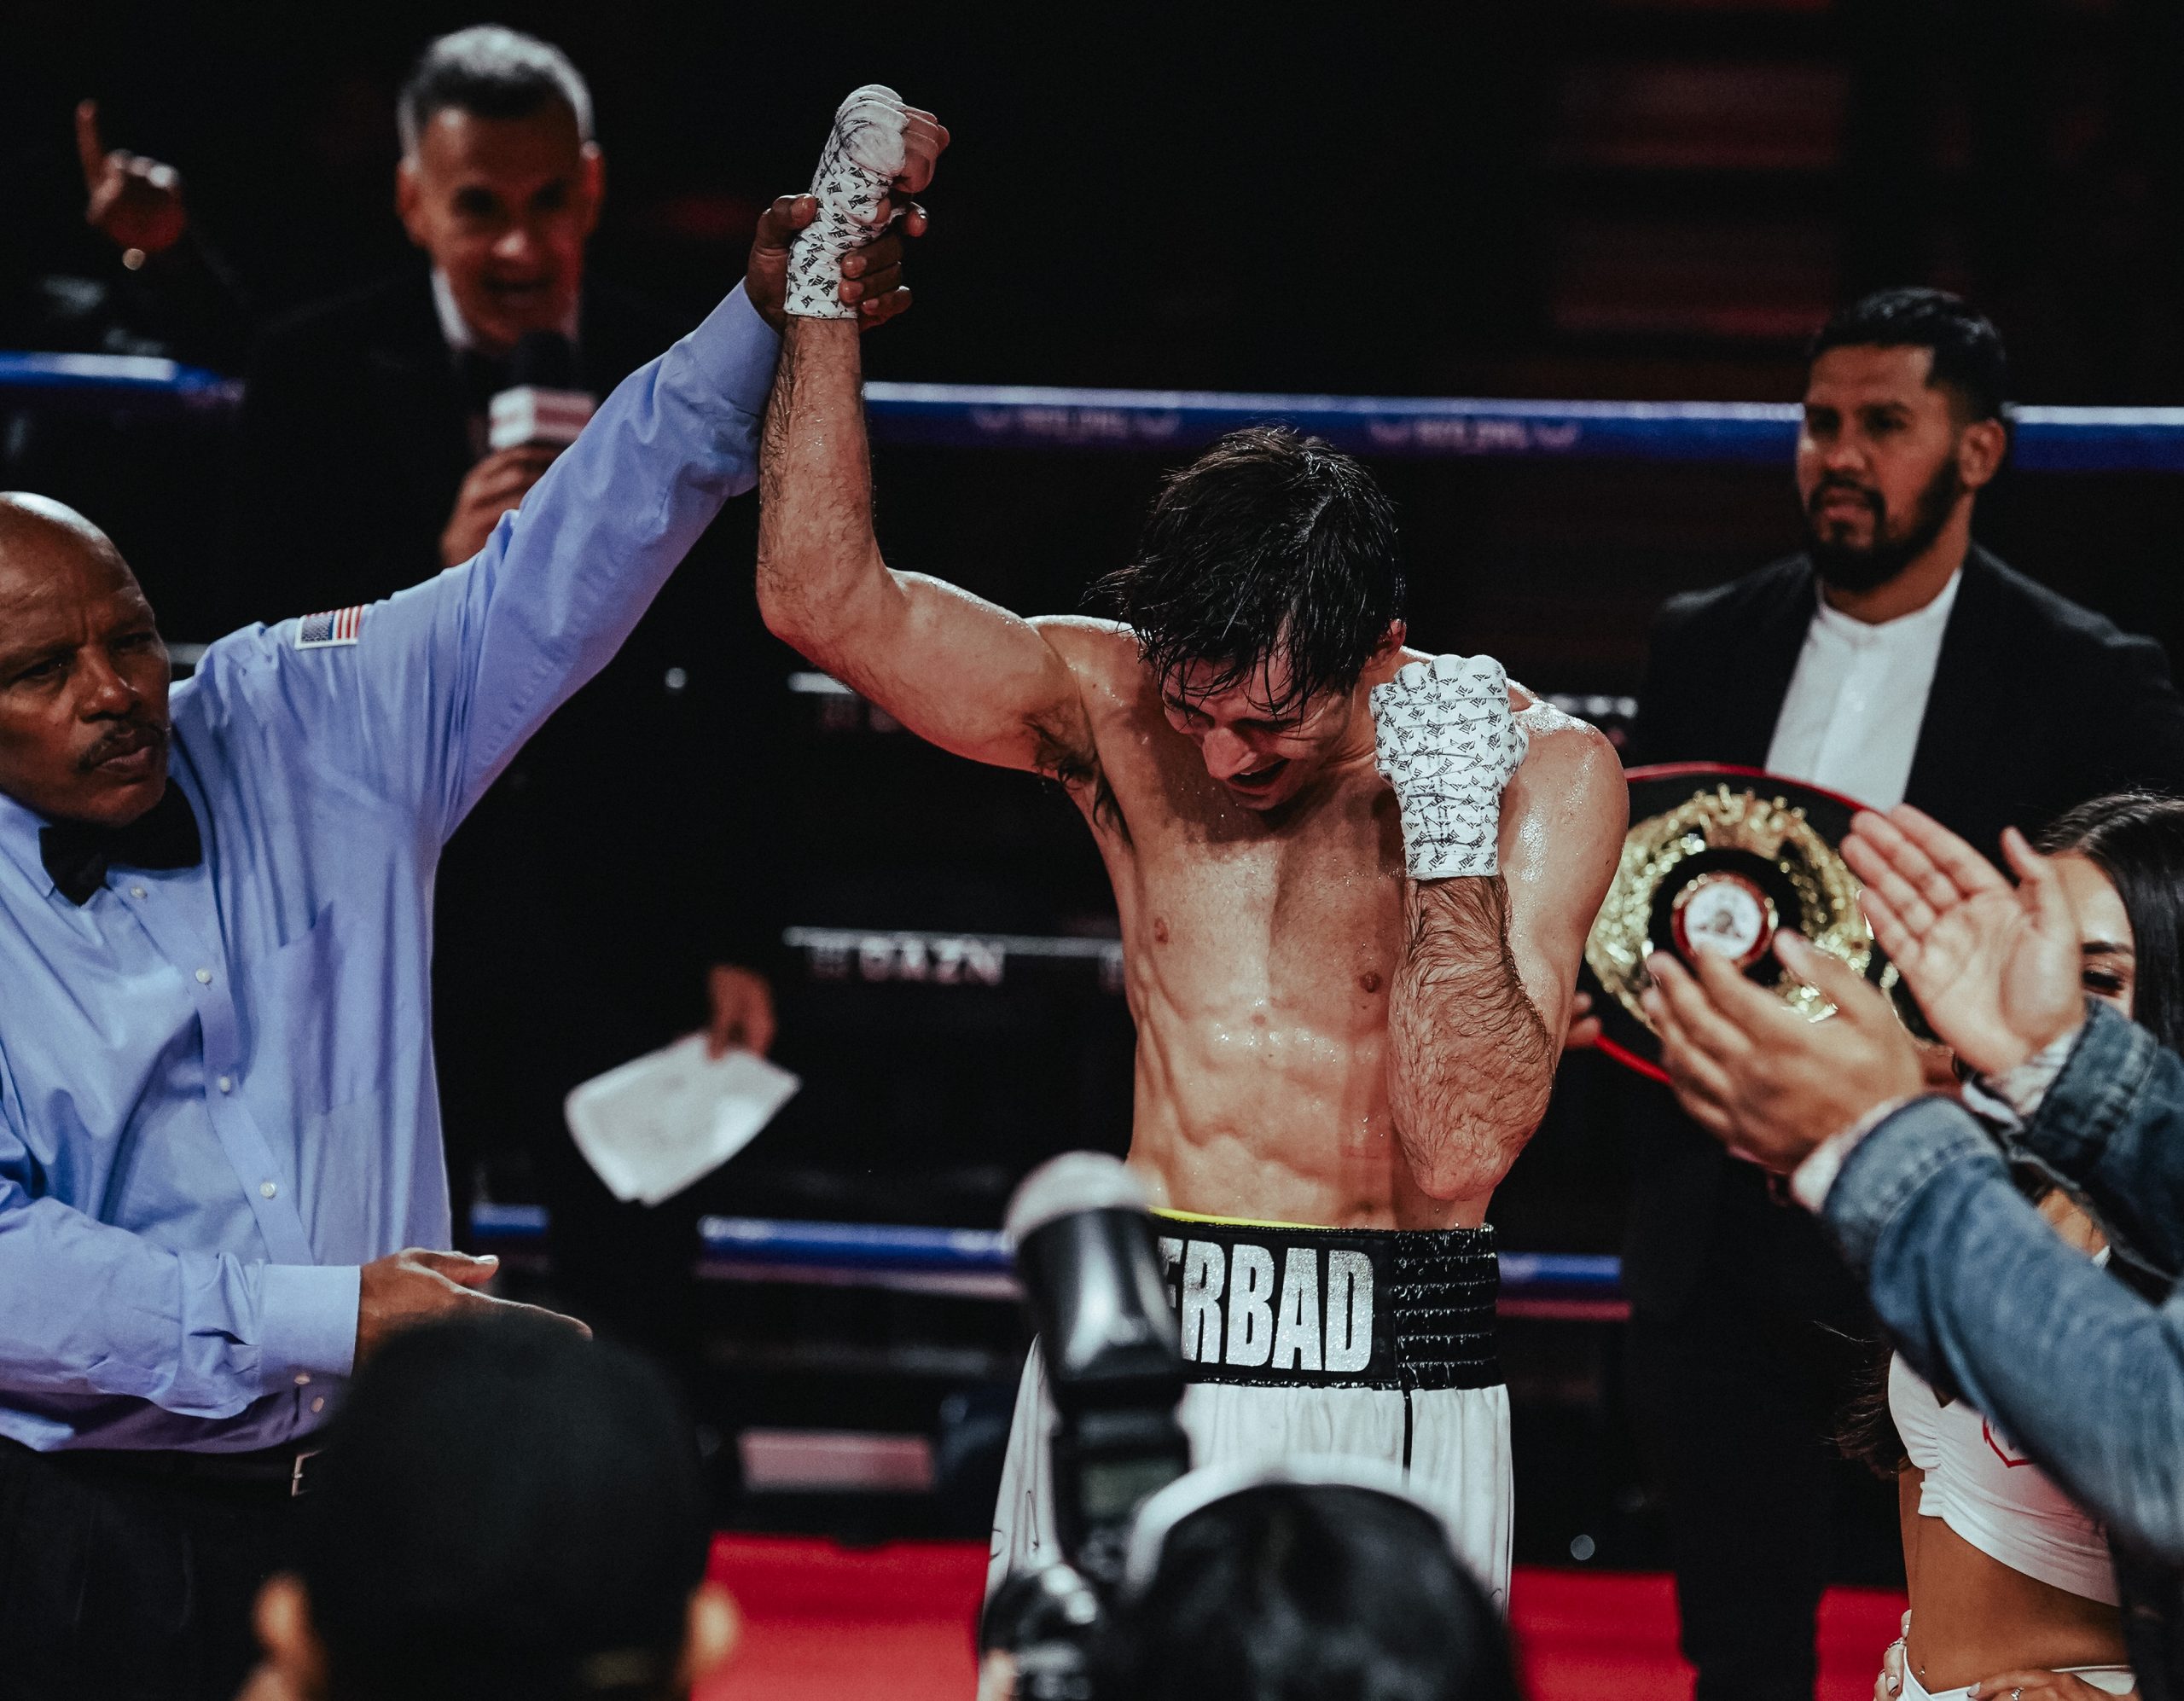 Vlad Panin beats Quashawn Toler by unanimous decision in Red Owl main event